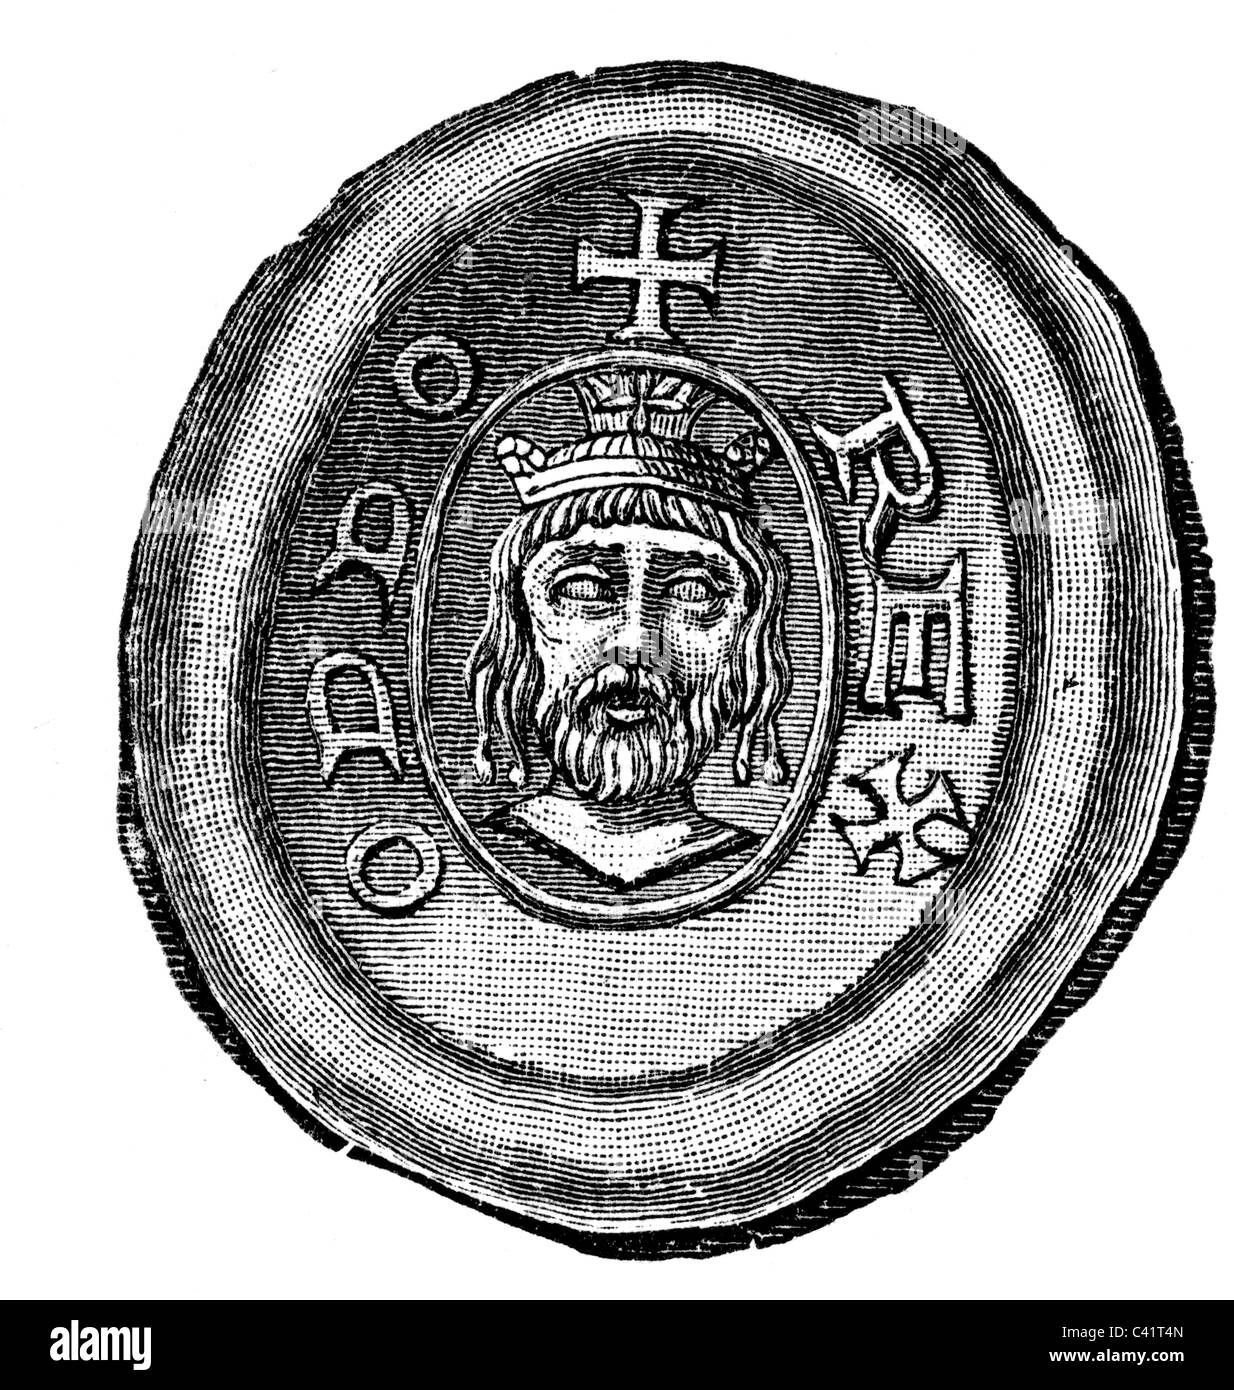 Otto I "the Great", 23.11.912 - 7.5.973, Holy Roman Emperor 2.2.962 - 7.5.973, portrait, seal, wood engraving, 19th century, , Stock Photo